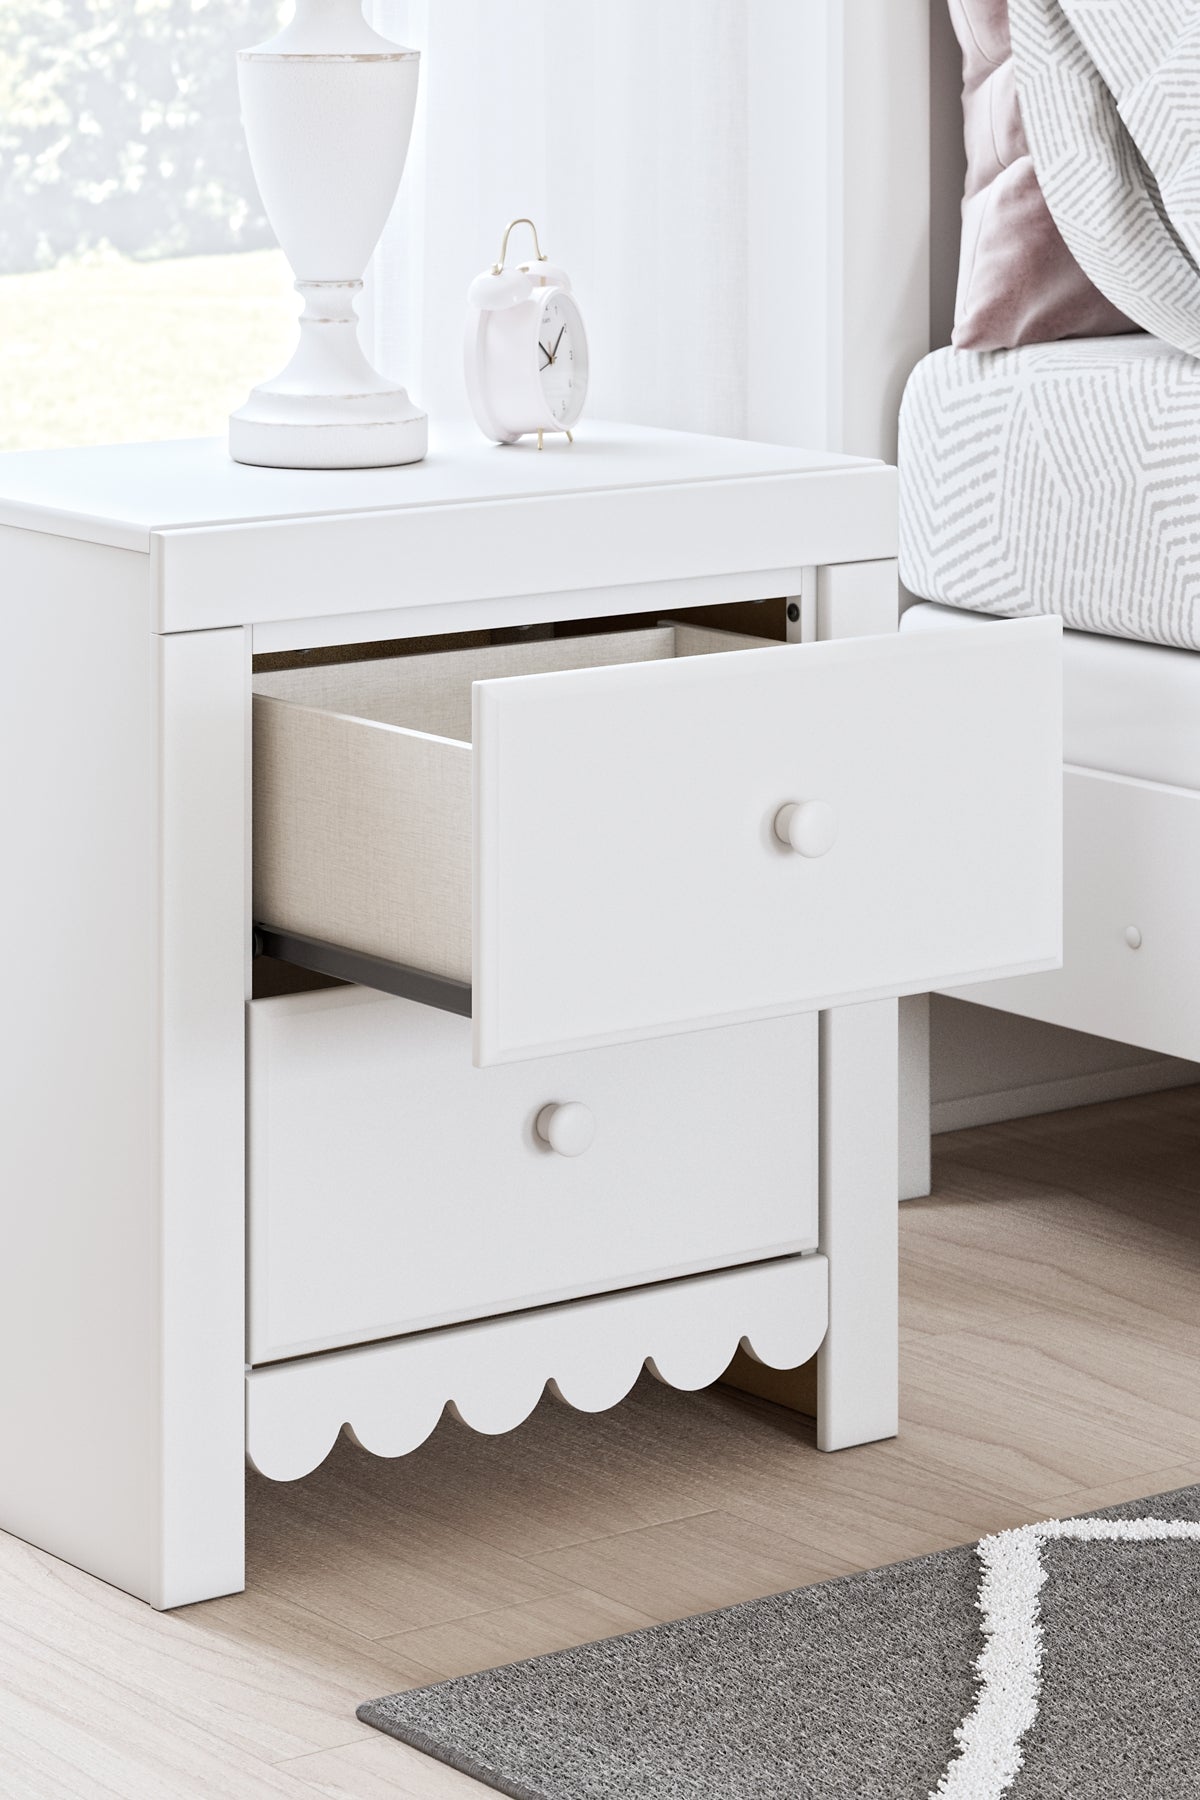 Mollviney Full Panel Storage Bed with Mirrored Dresser, Chest and 2 Nightstands Signature Design by Ashley®